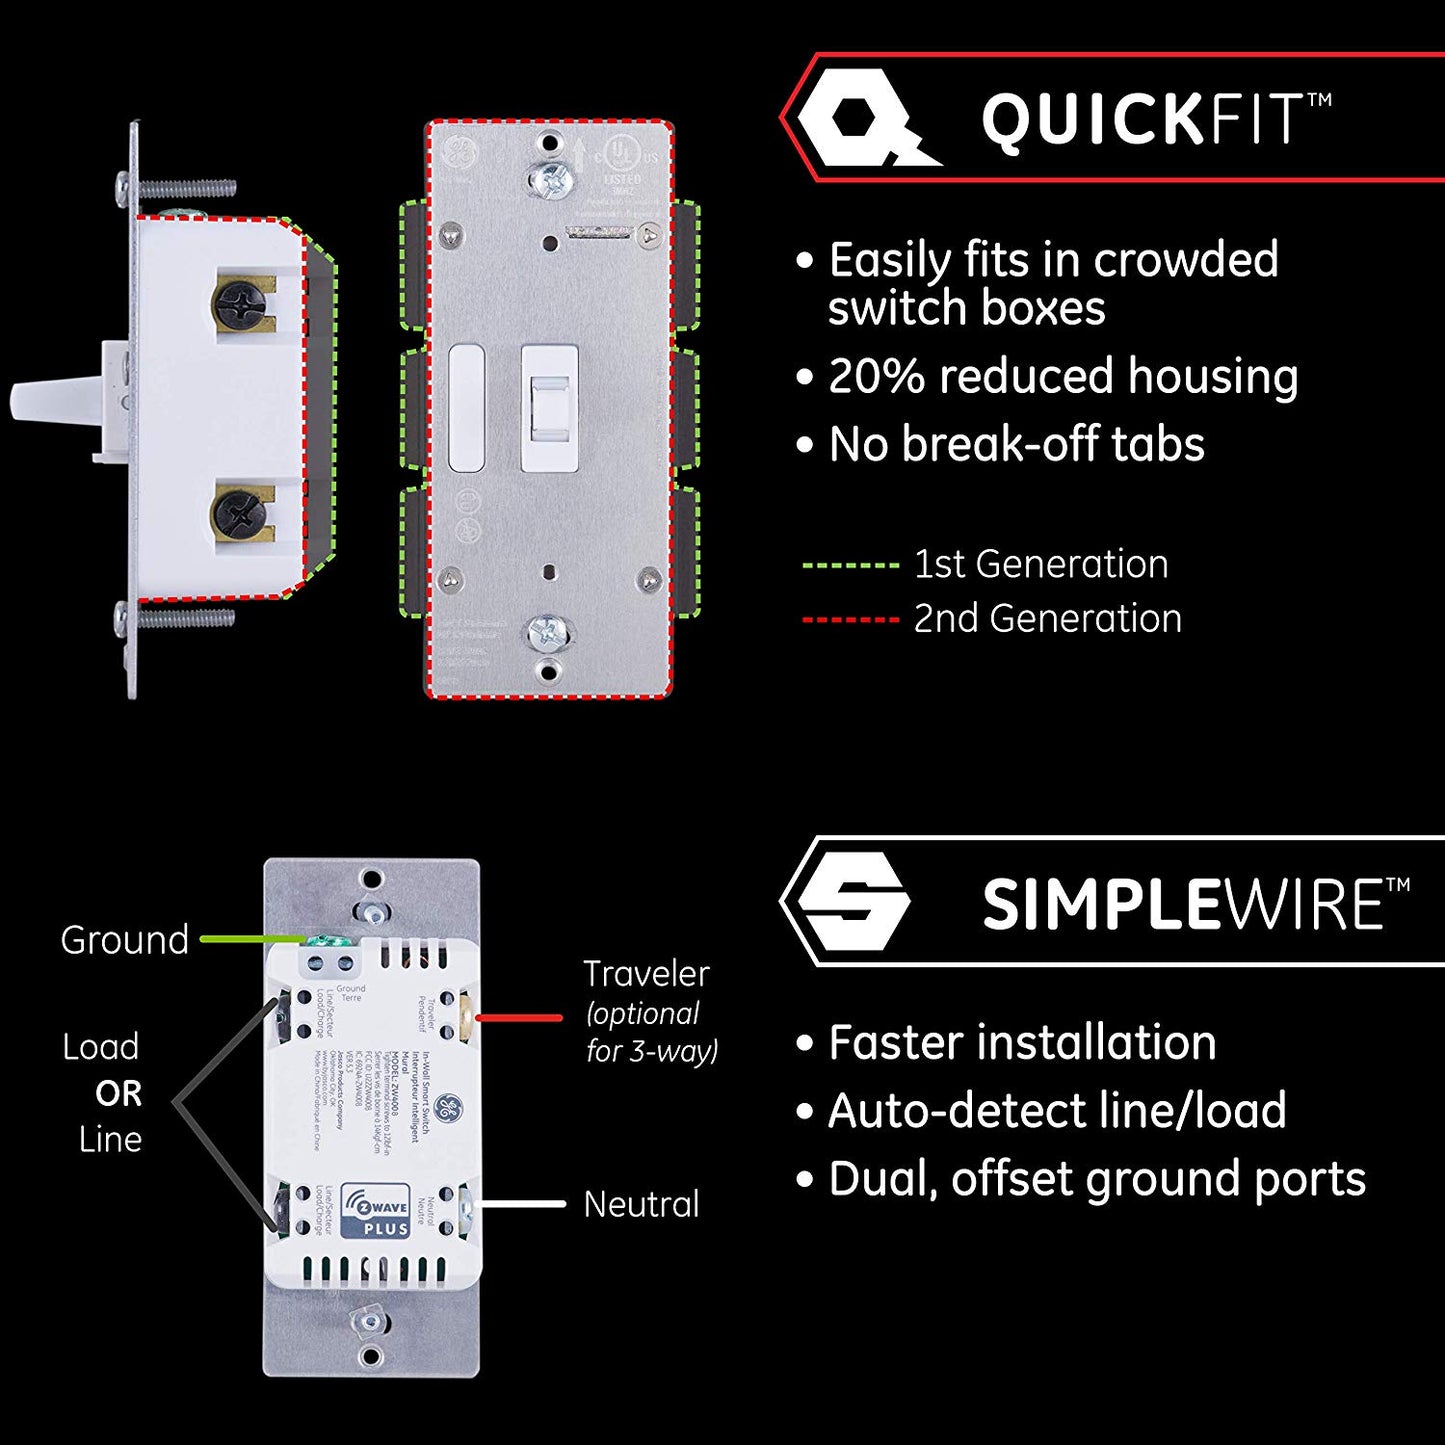 GE Enbrighten Z-Wave Plus Smart On/Off Toggle Switch With QuickFit, SimpleWire, S2, and SmartStart - 46202